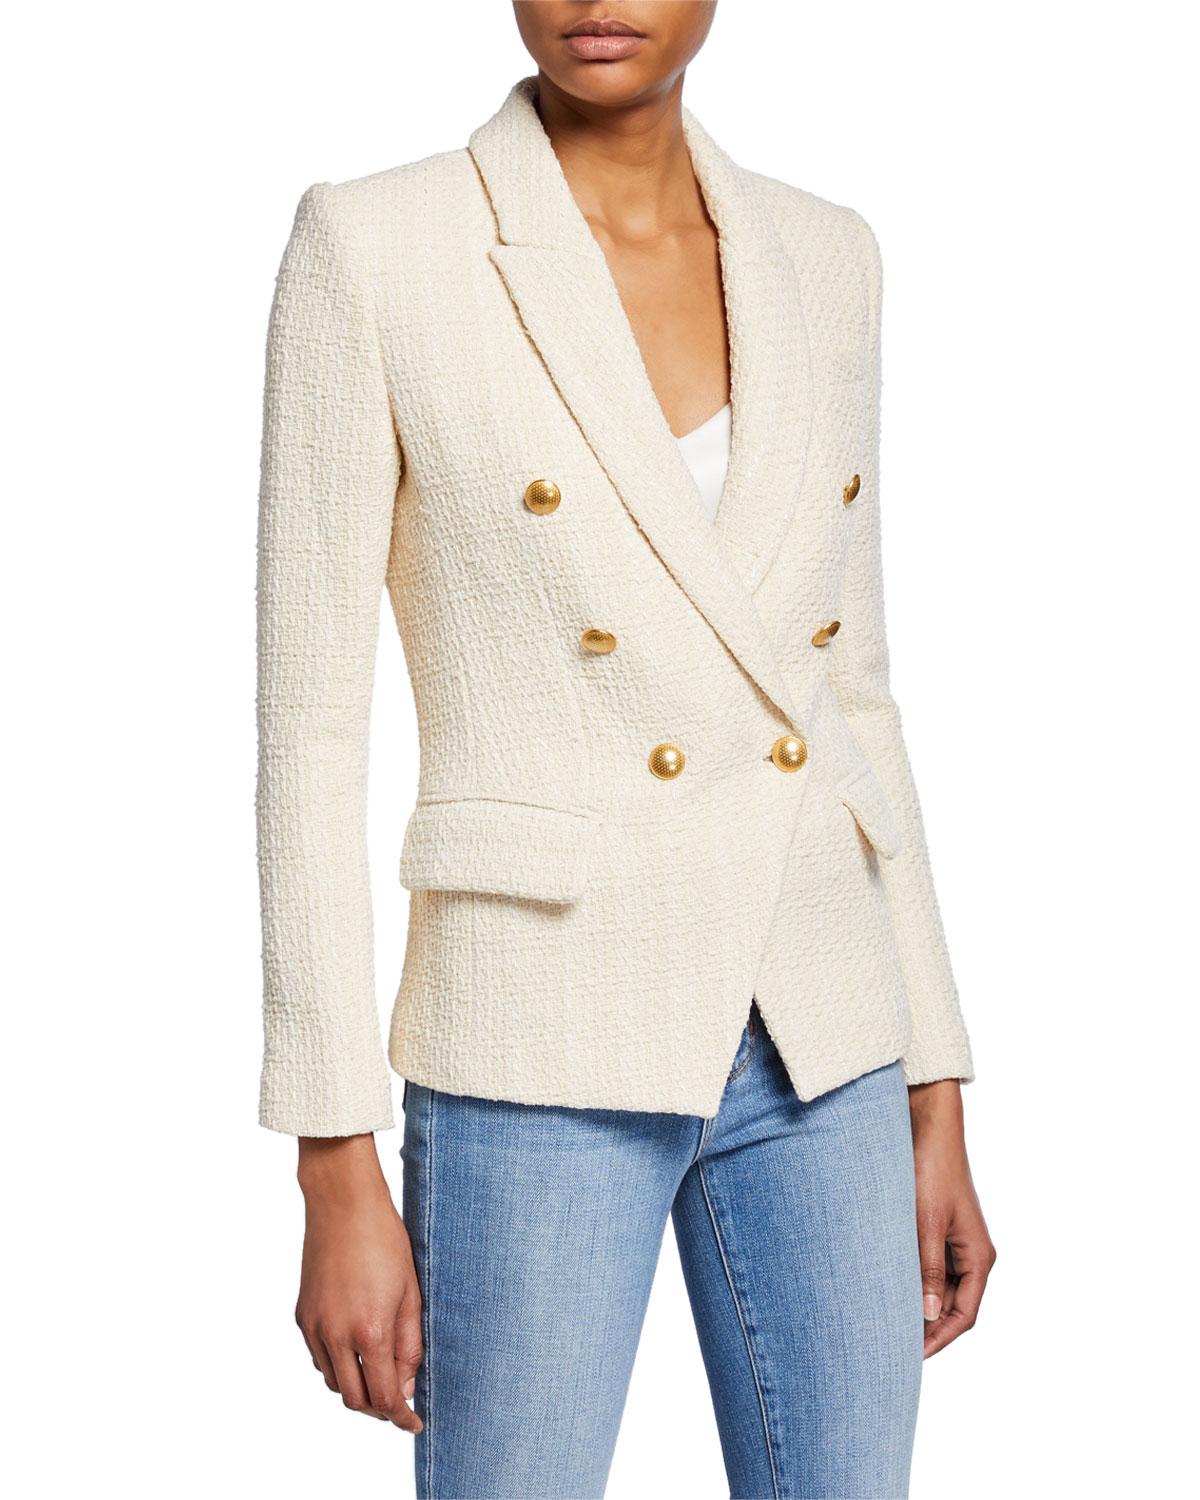 L'Agence Kenzie Double-breasted Tweed Blazer in Ivory (White) - Lyst